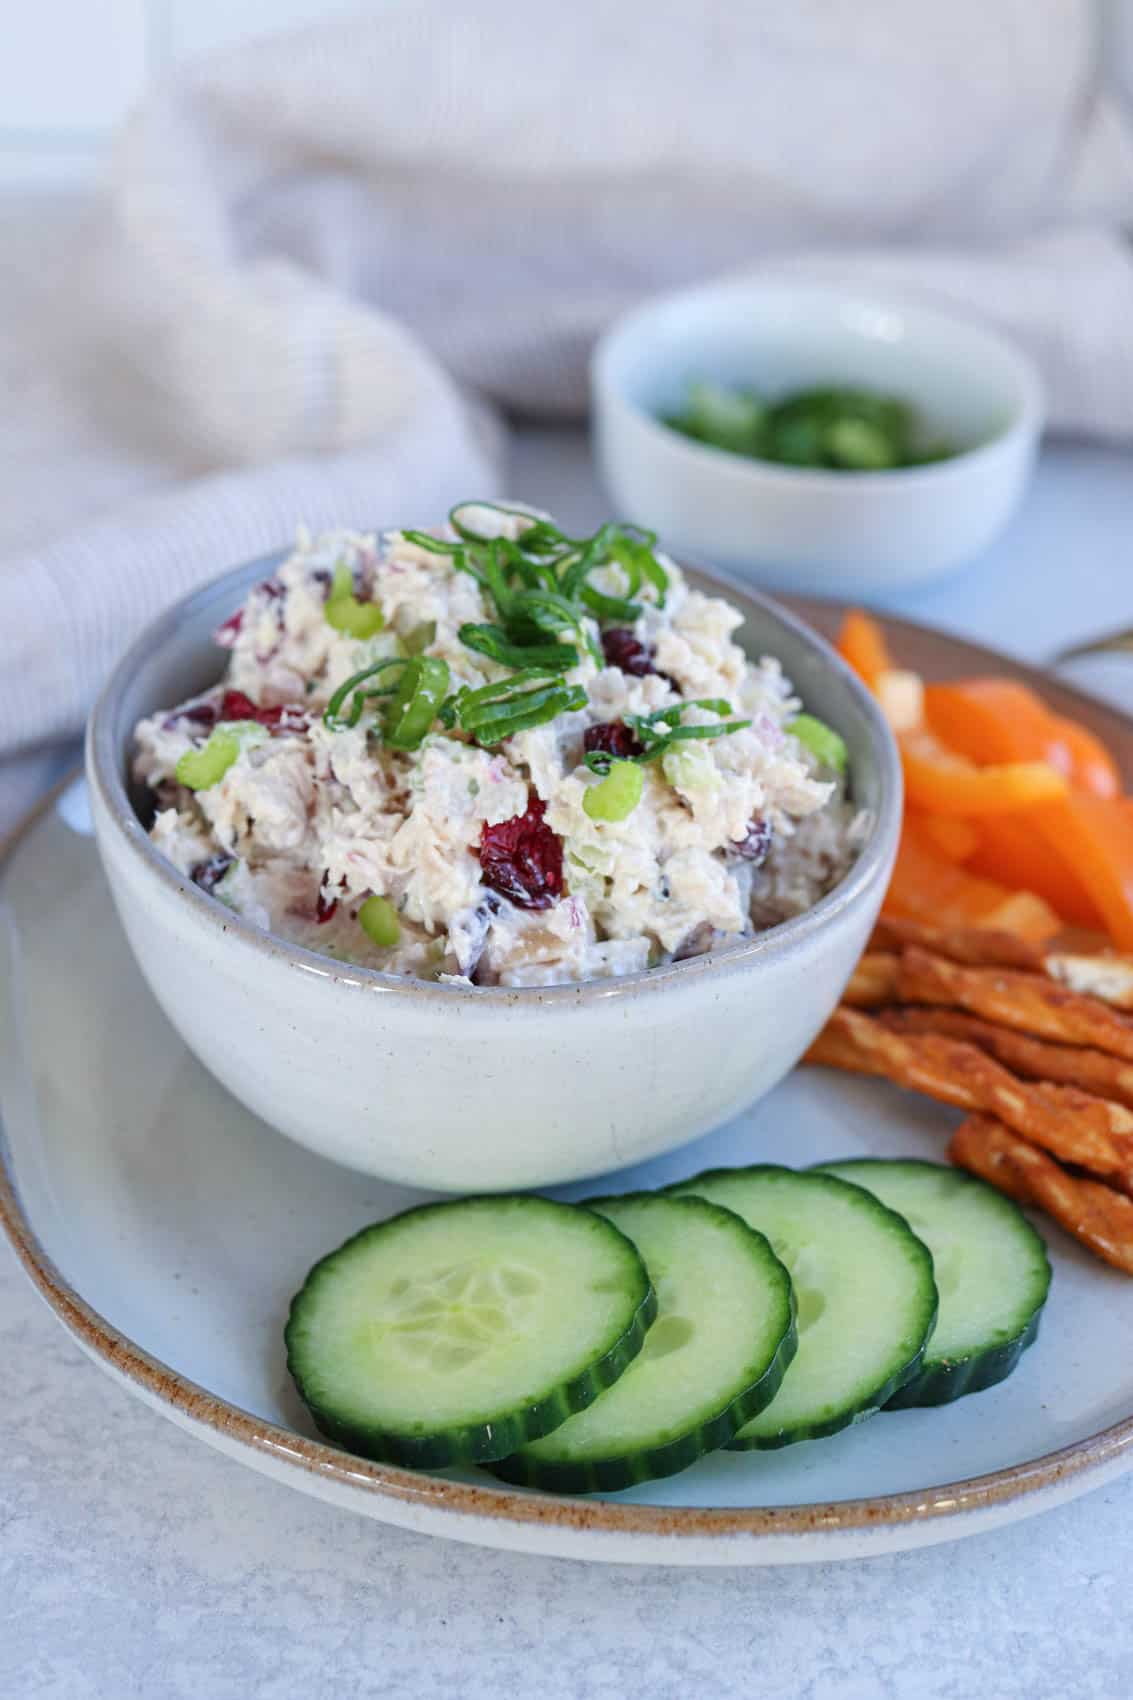 Creamy chicken salad in a small gray bowl with chopped scallions on top on a plate with cucumber slices, pretzel sticks, and orange bell pepper.